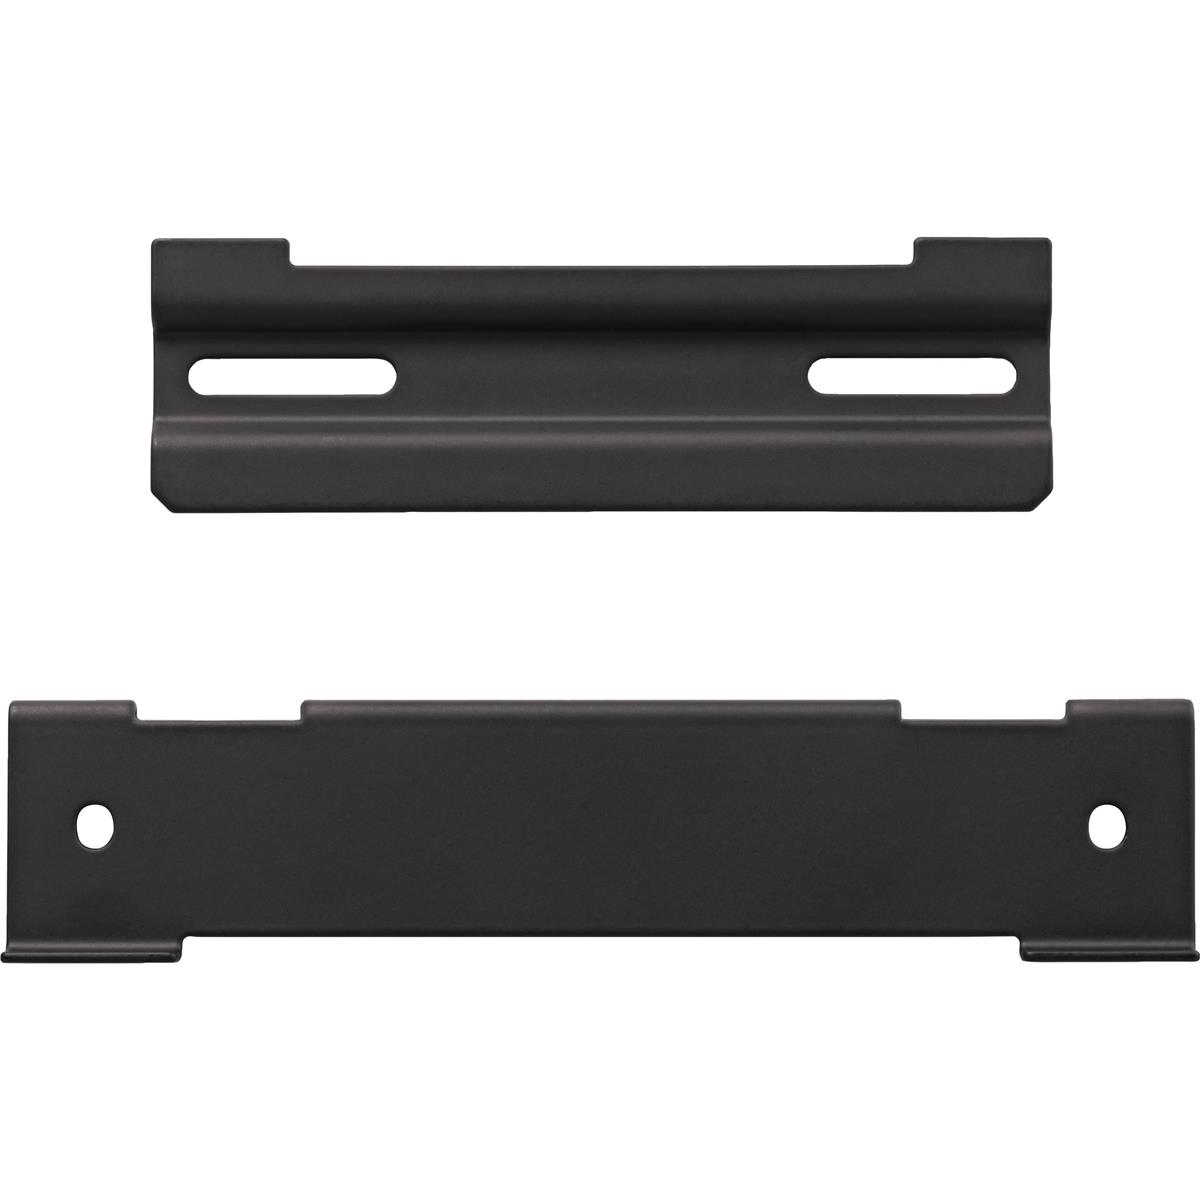 Image of Bose WB-120 Wall Mount Kit for Bose CineMate 120 Home Theater Systems